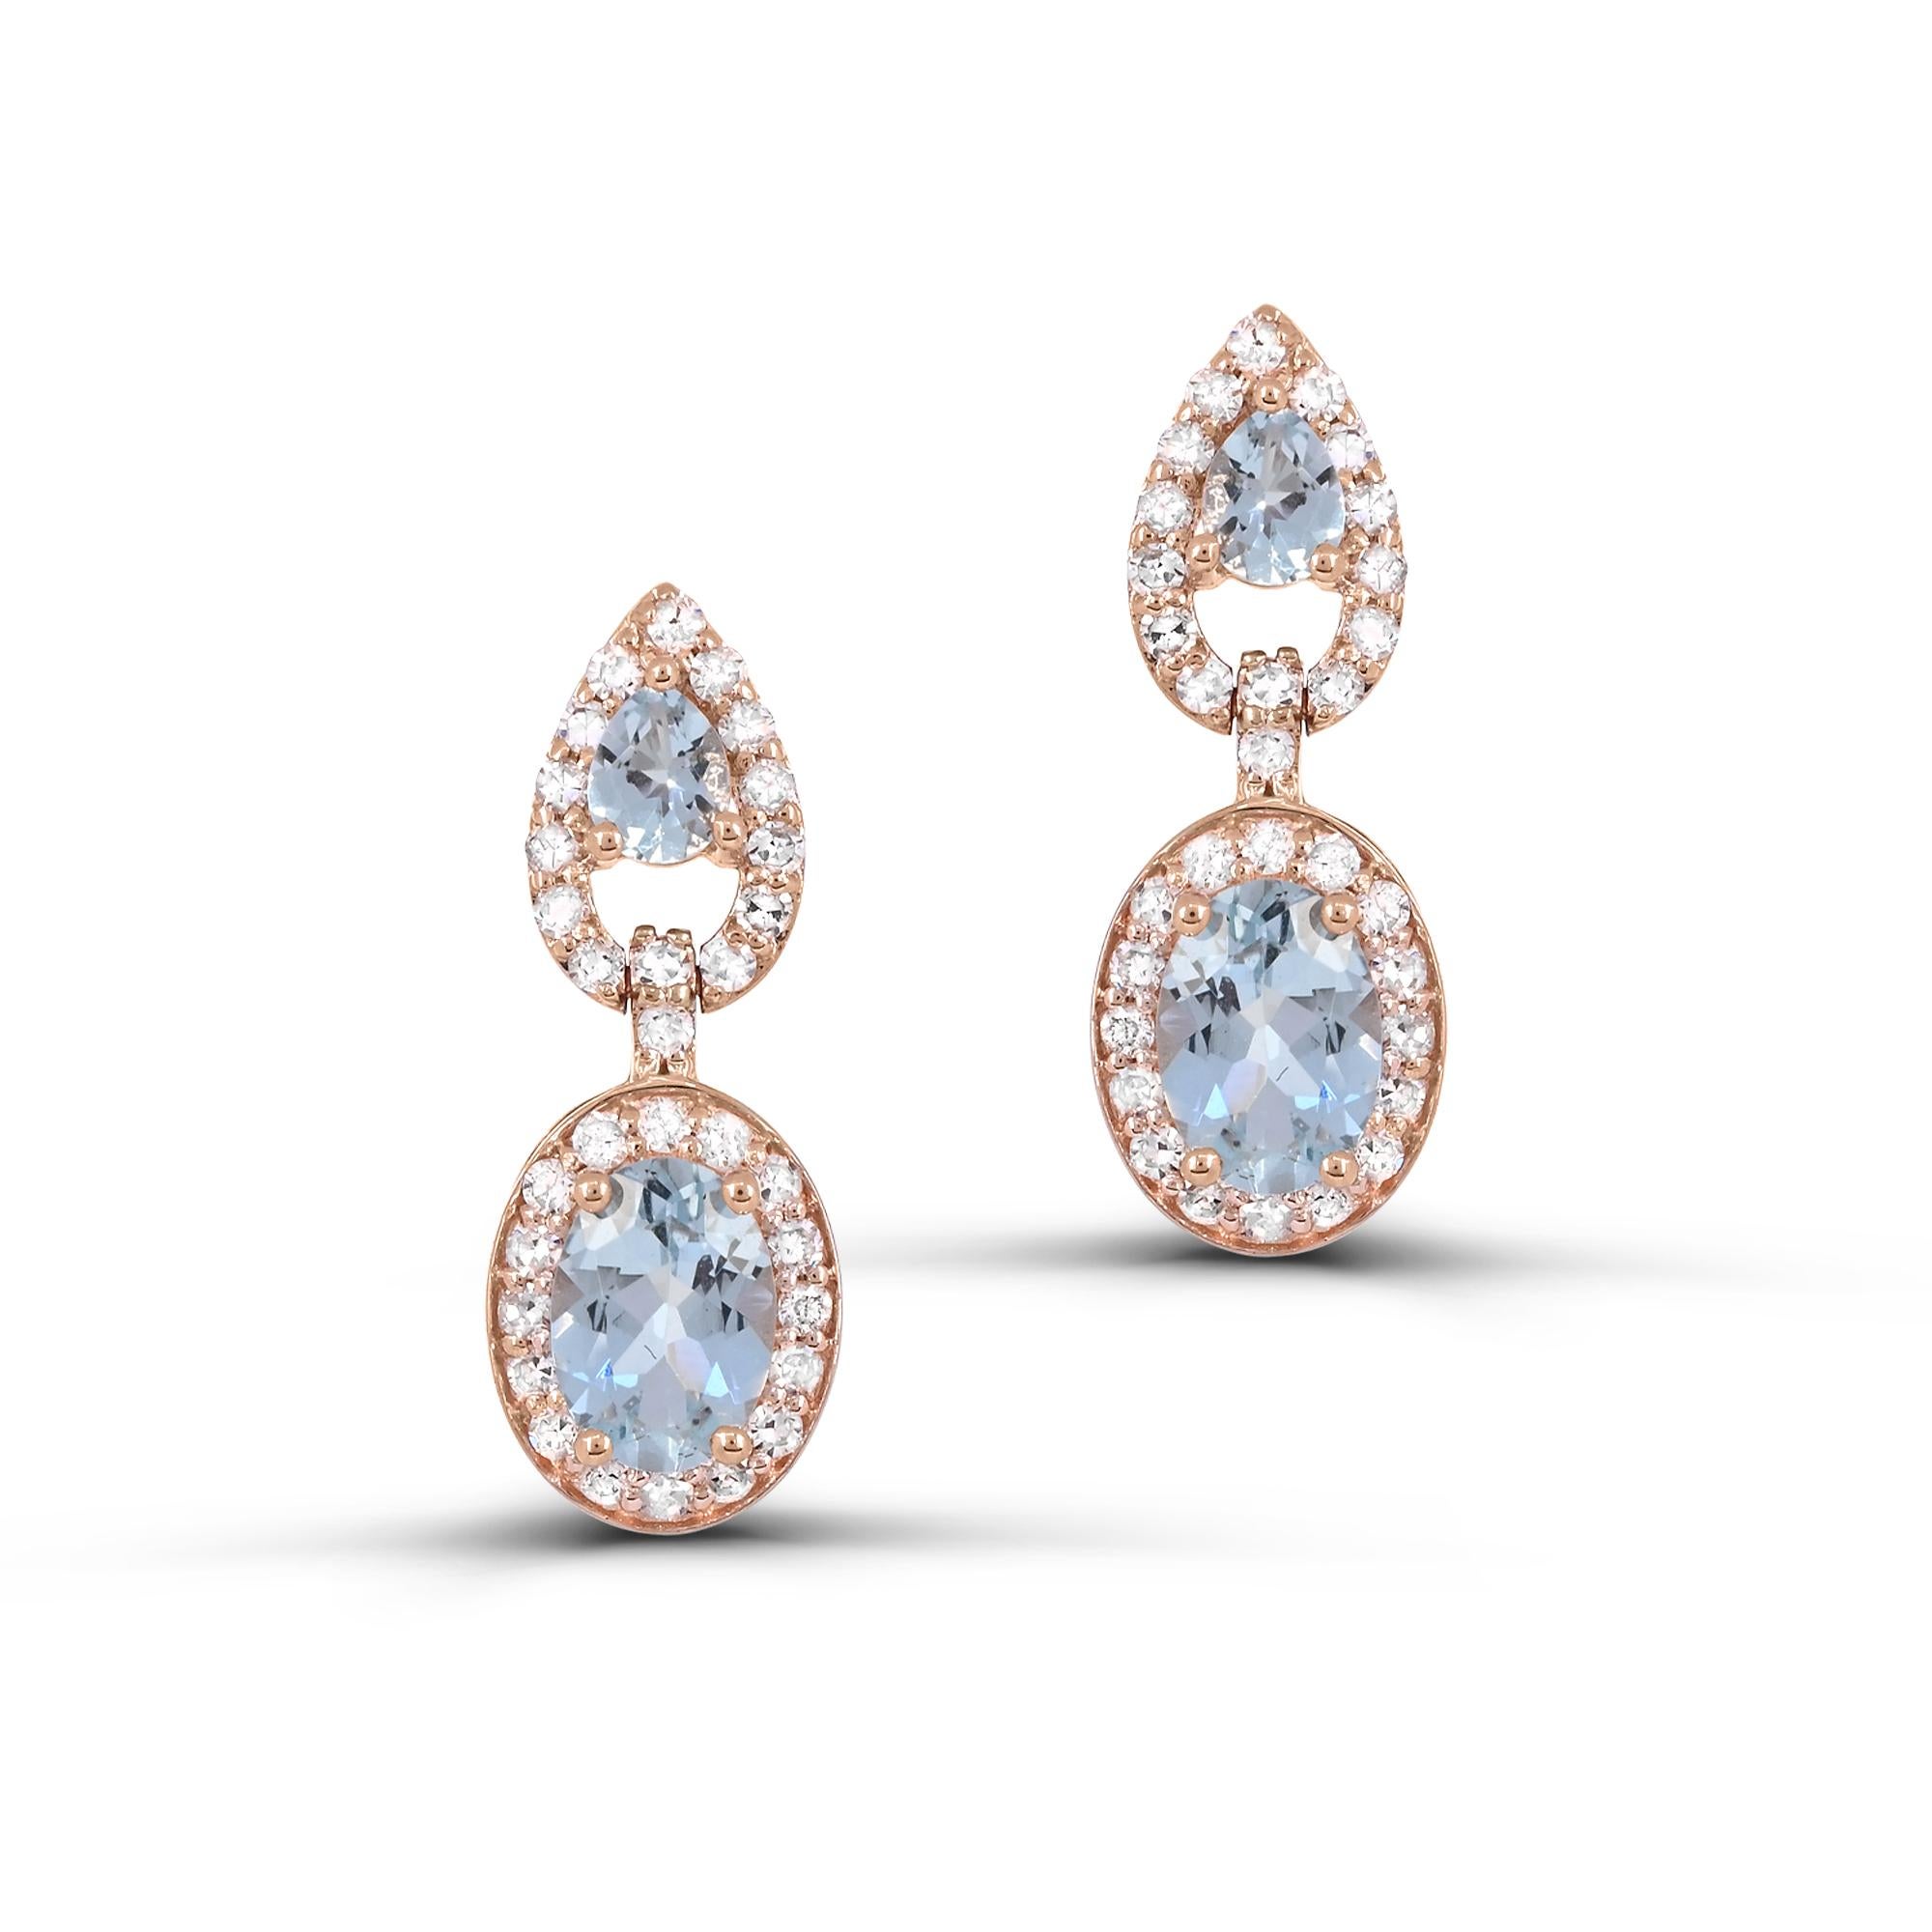 Elevate your style with our exquisite 2.48 Carat Aquamarine and Diamond Accented Drop Earrings in 14K Rose Gold. Crafted from luxurious 14K rose gold, these earrings feature one pear-cut and oval-cut aquamarine that exude elegance and